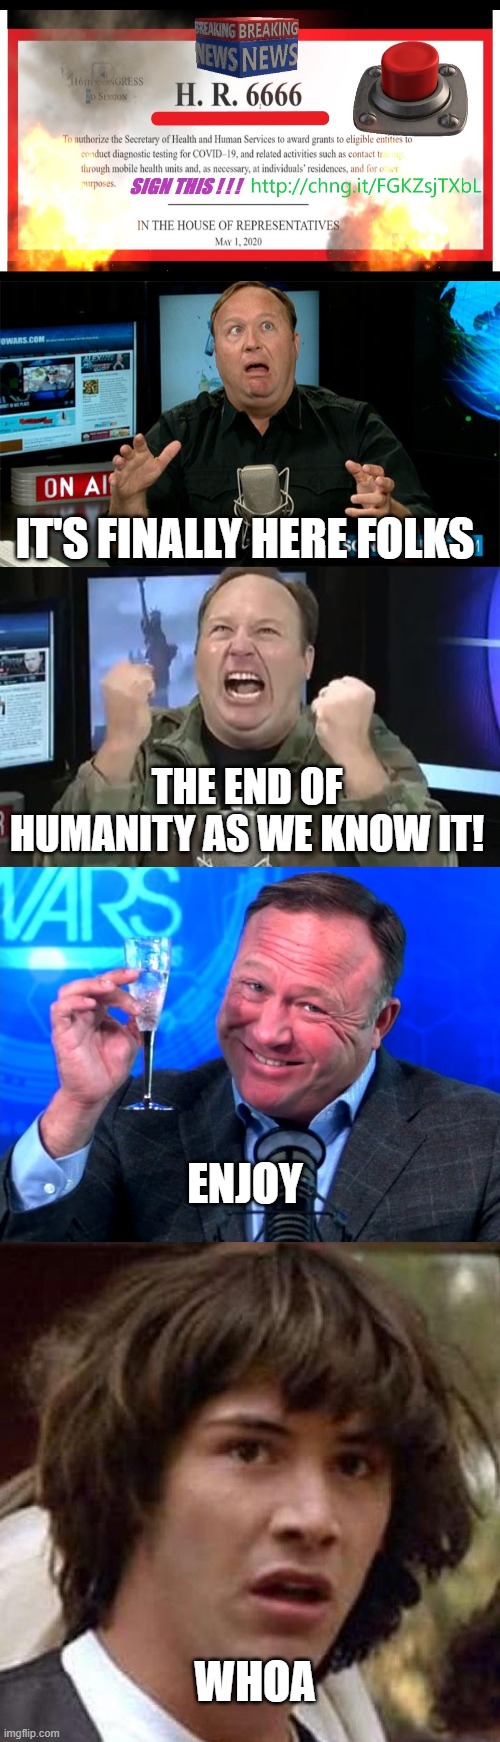 Alex Jones was right |  IT'S FINALLY HERE FOLKS; THE END OF HUMANITY AS WE KNOW IT! ENJOY; WHOA | image tagged in muh alex jones,alex jones,whoa,conspiracy keanu,covid-19 | made w/ Imgflip meme maker